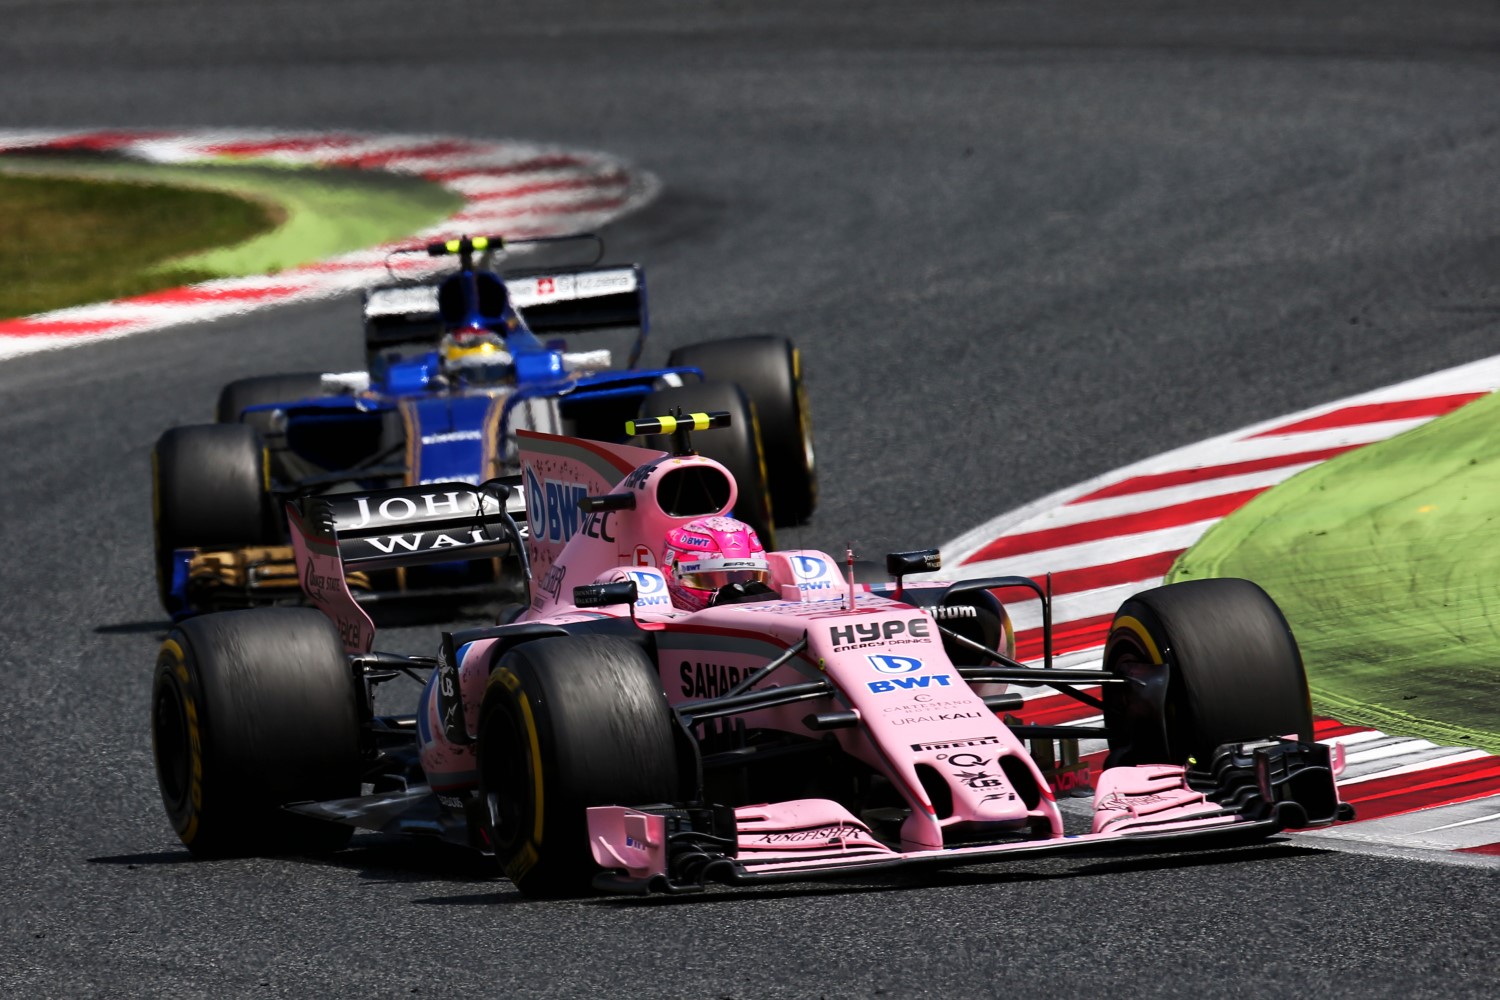 Ocon in the Force India